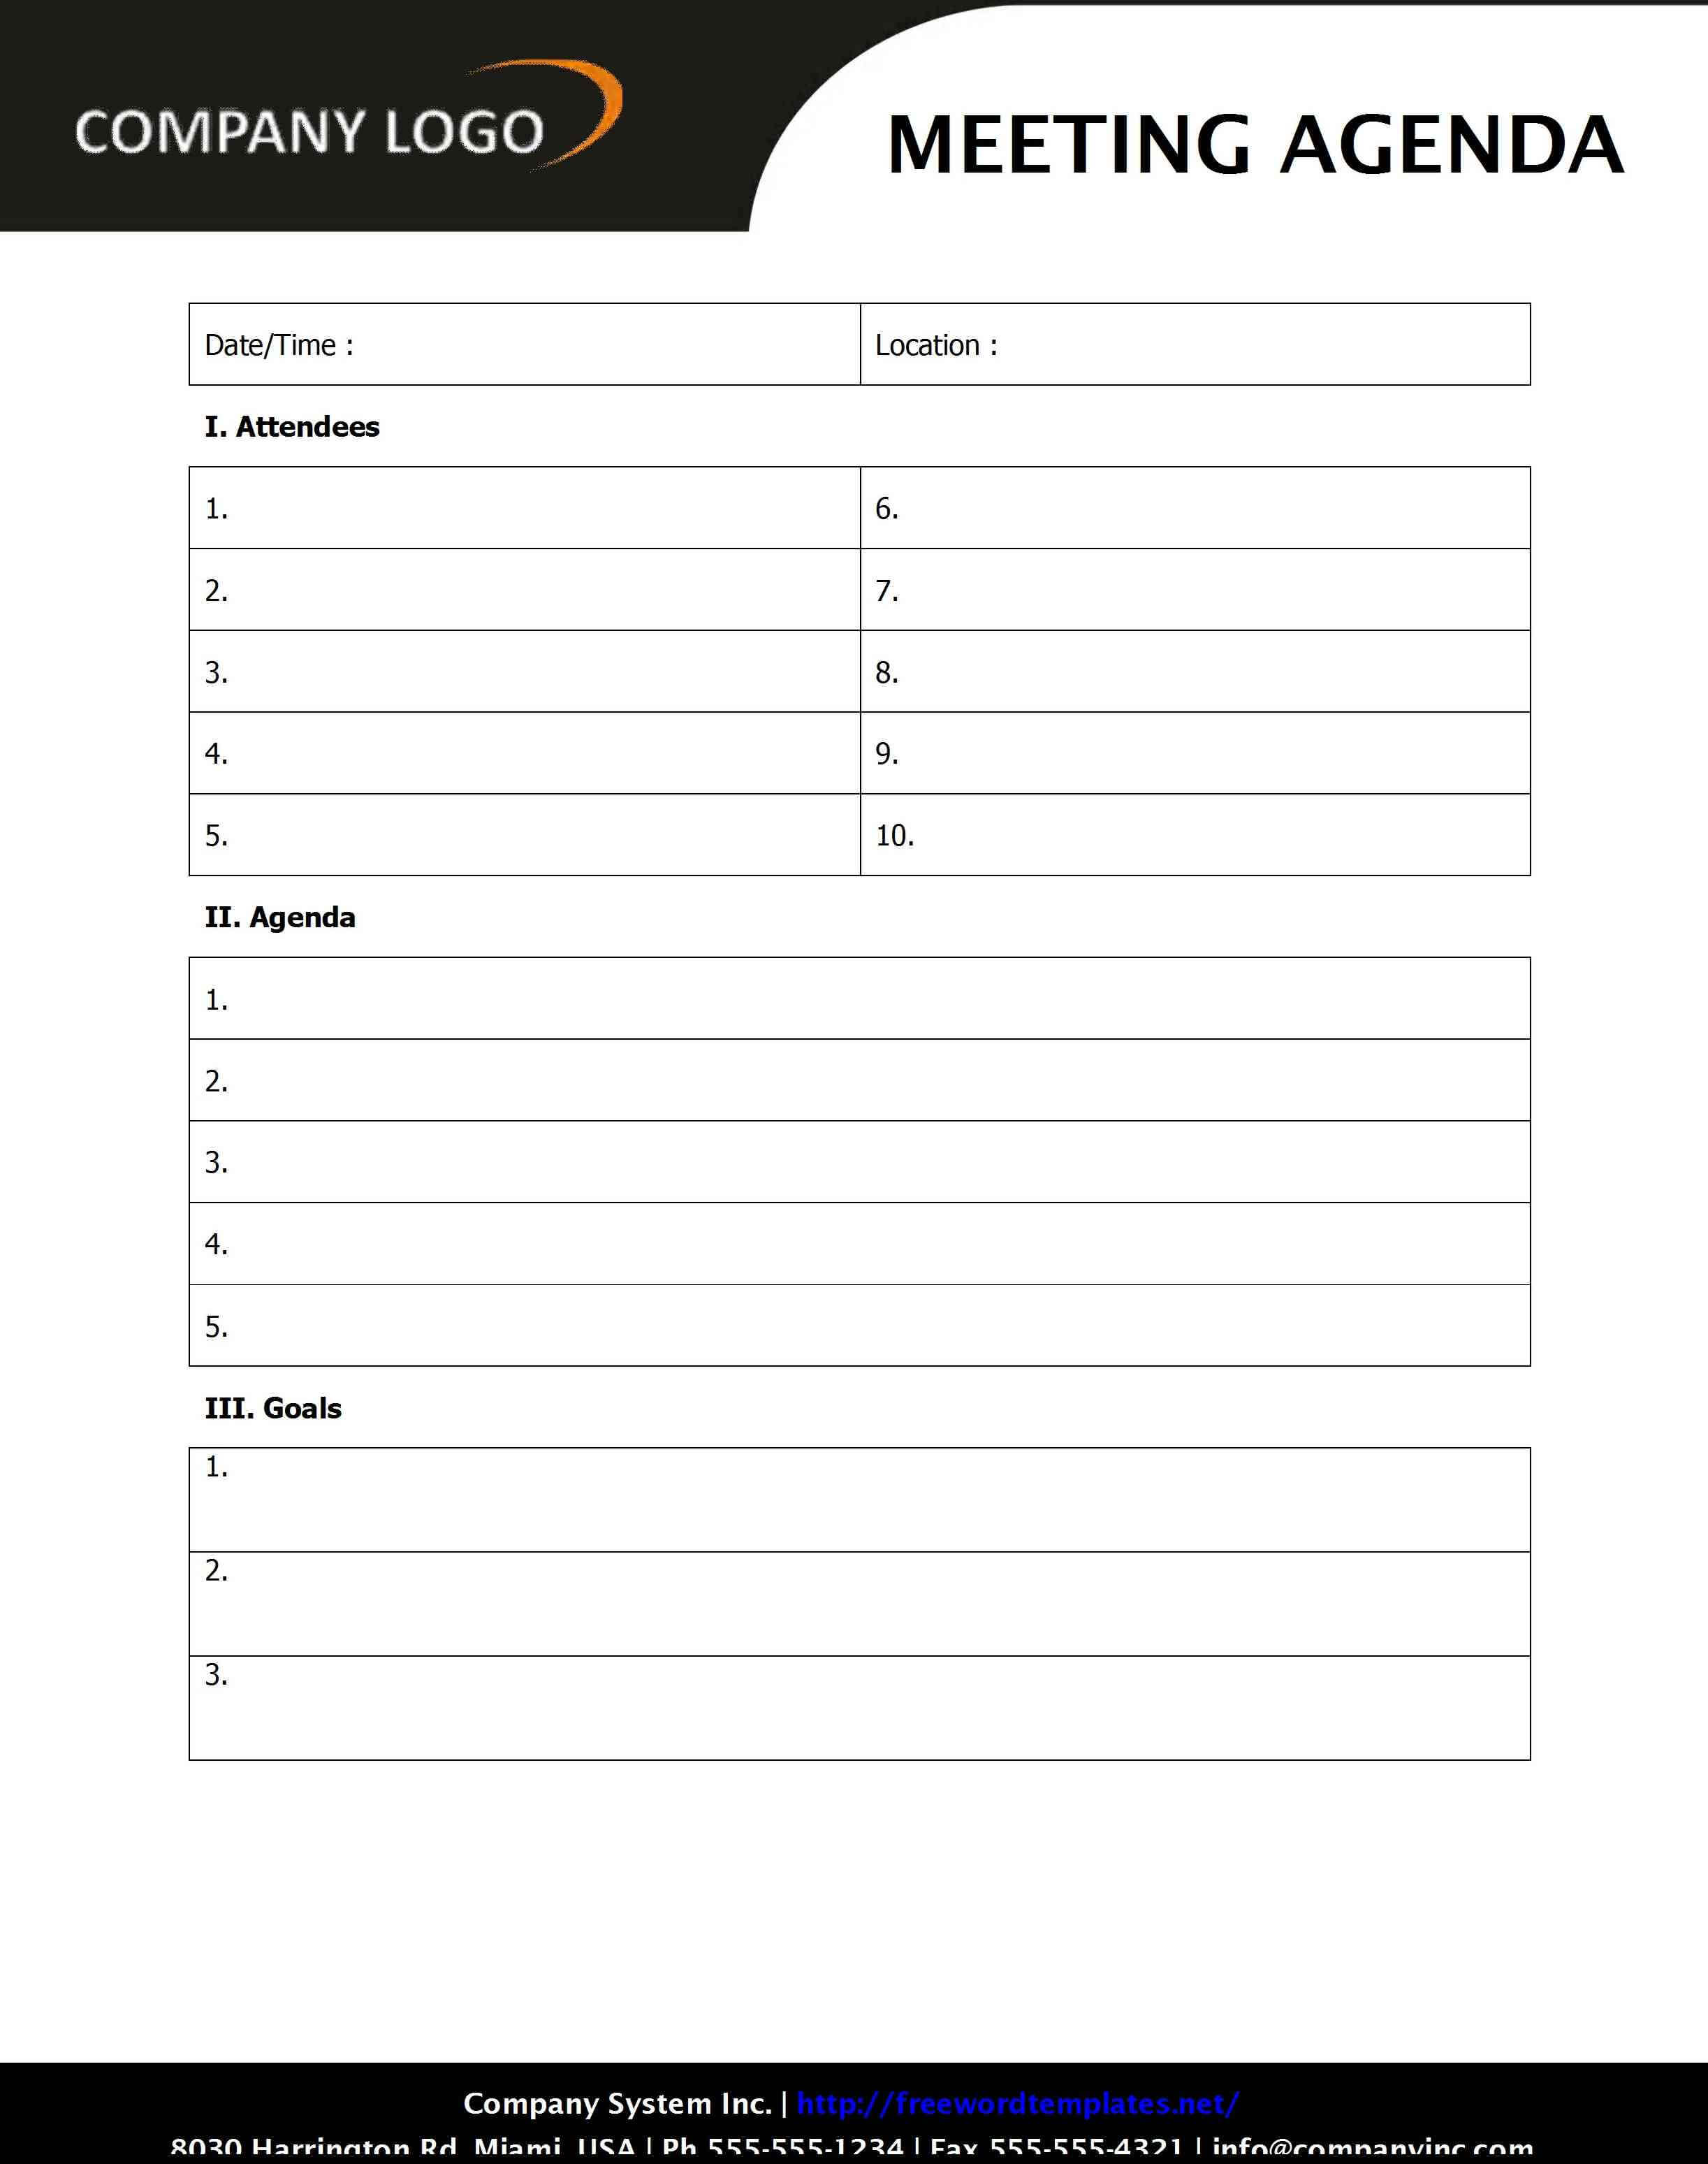 Meeting Agenda With Free Meeting Agenda Templates For Word